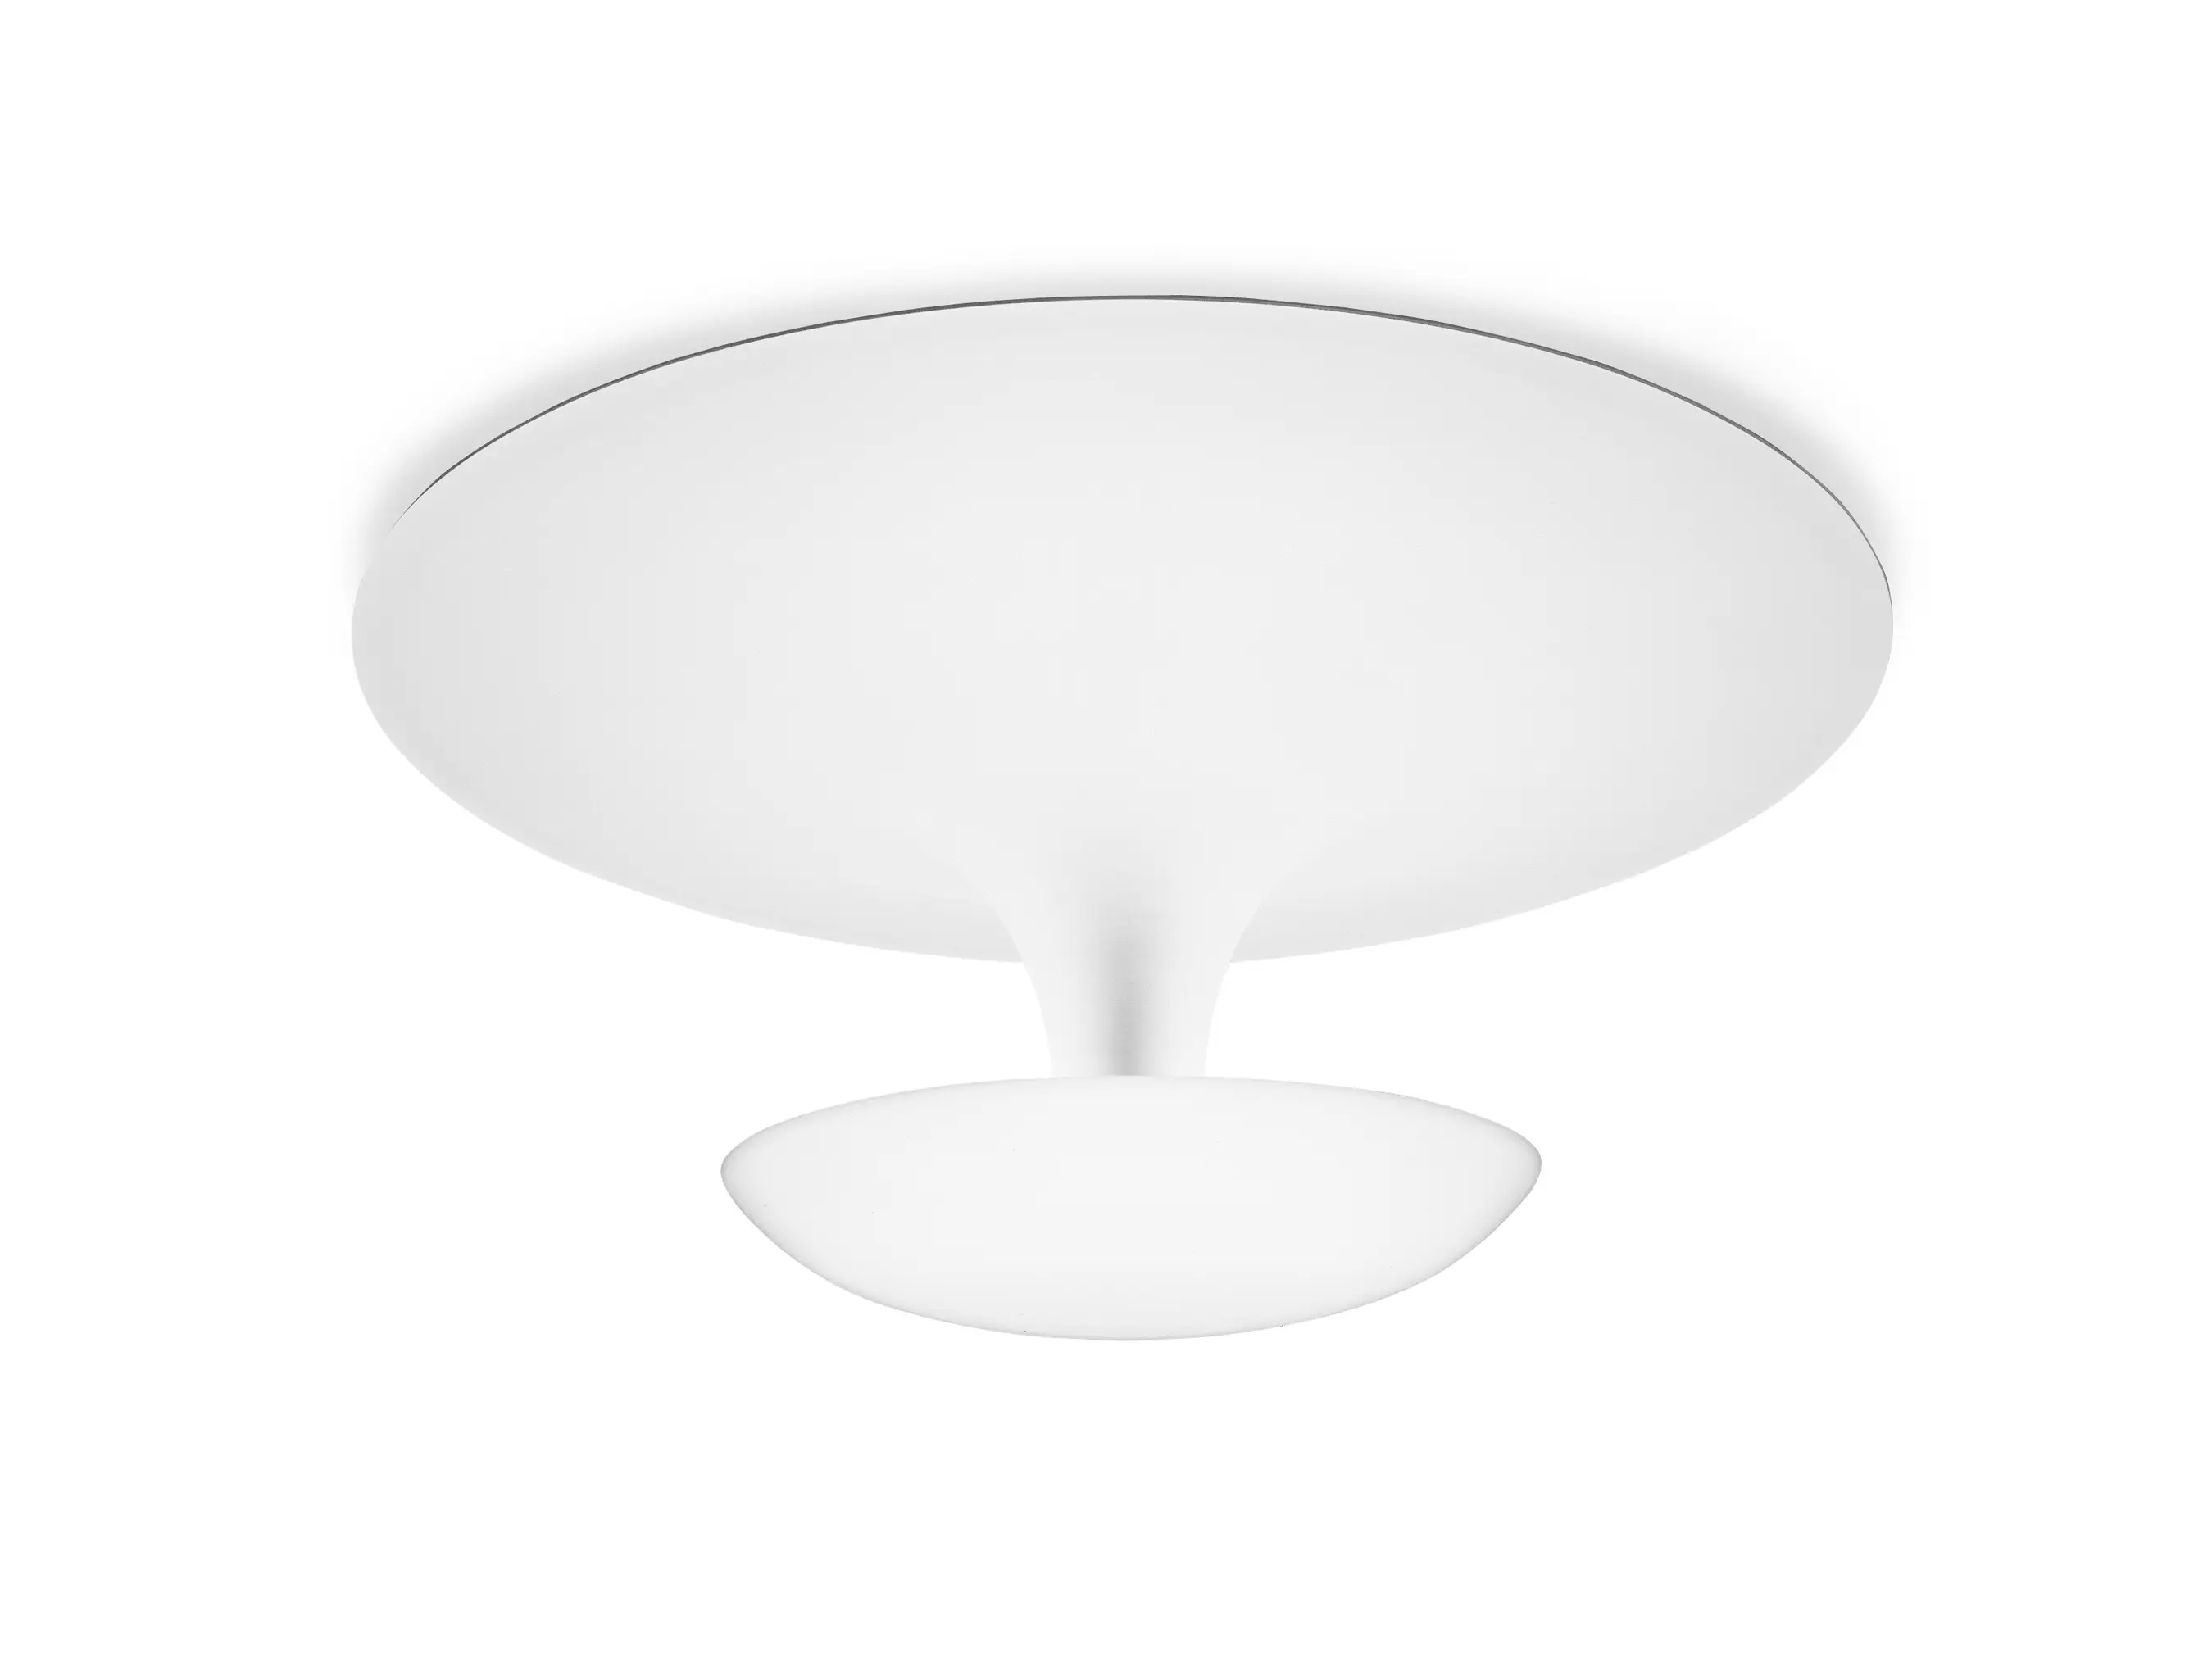 Overhead lamp Funnel by Vibia